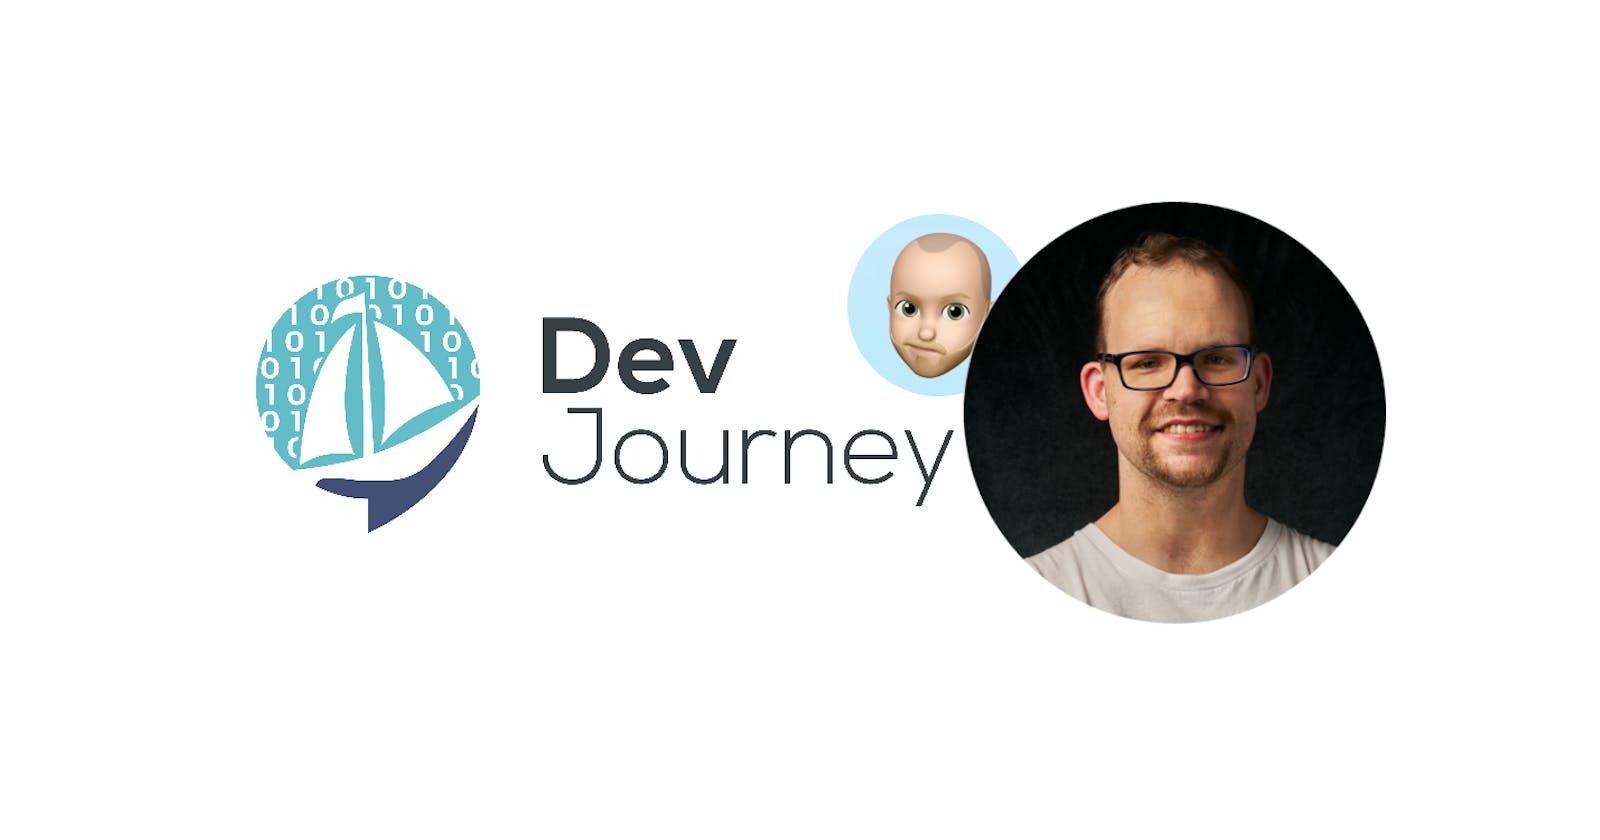 Josh Long found his place in the world as a developer advocate with the Spring team... and other things I learned recording his DevJourney